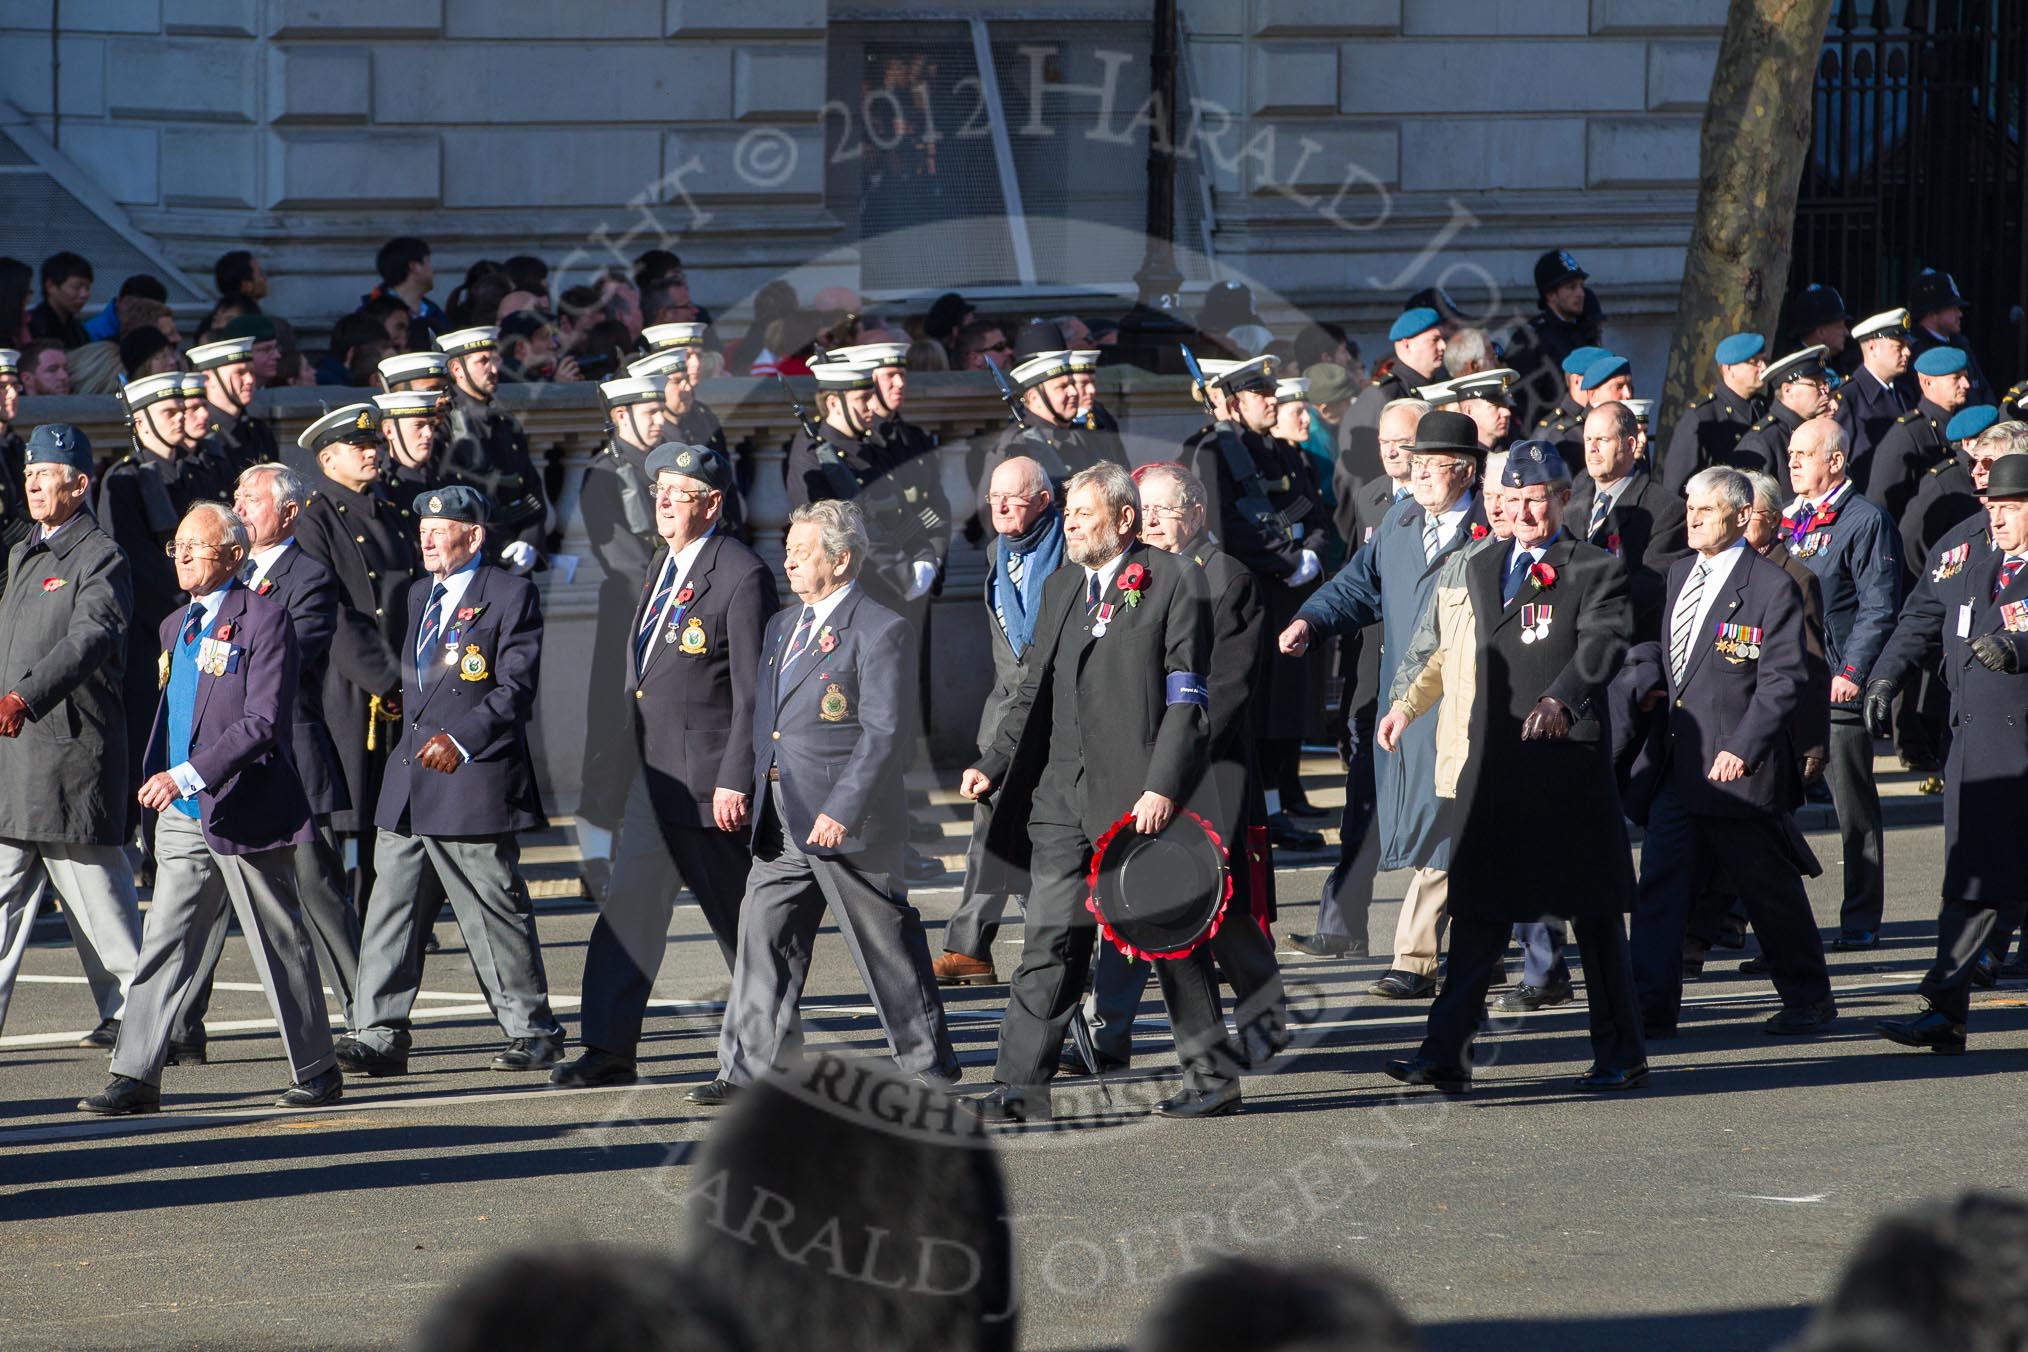 Remembrance Sunday 2012 Cenotaph March Past: Group C18 - 6 Squadron (Royal Air Force) Association and C19 - 7 Squadron Association (30)..
Whitehall, Cenotaph,
London SW1,

United Kingdom,
on 11 November 2012 at 12:03, image #1166